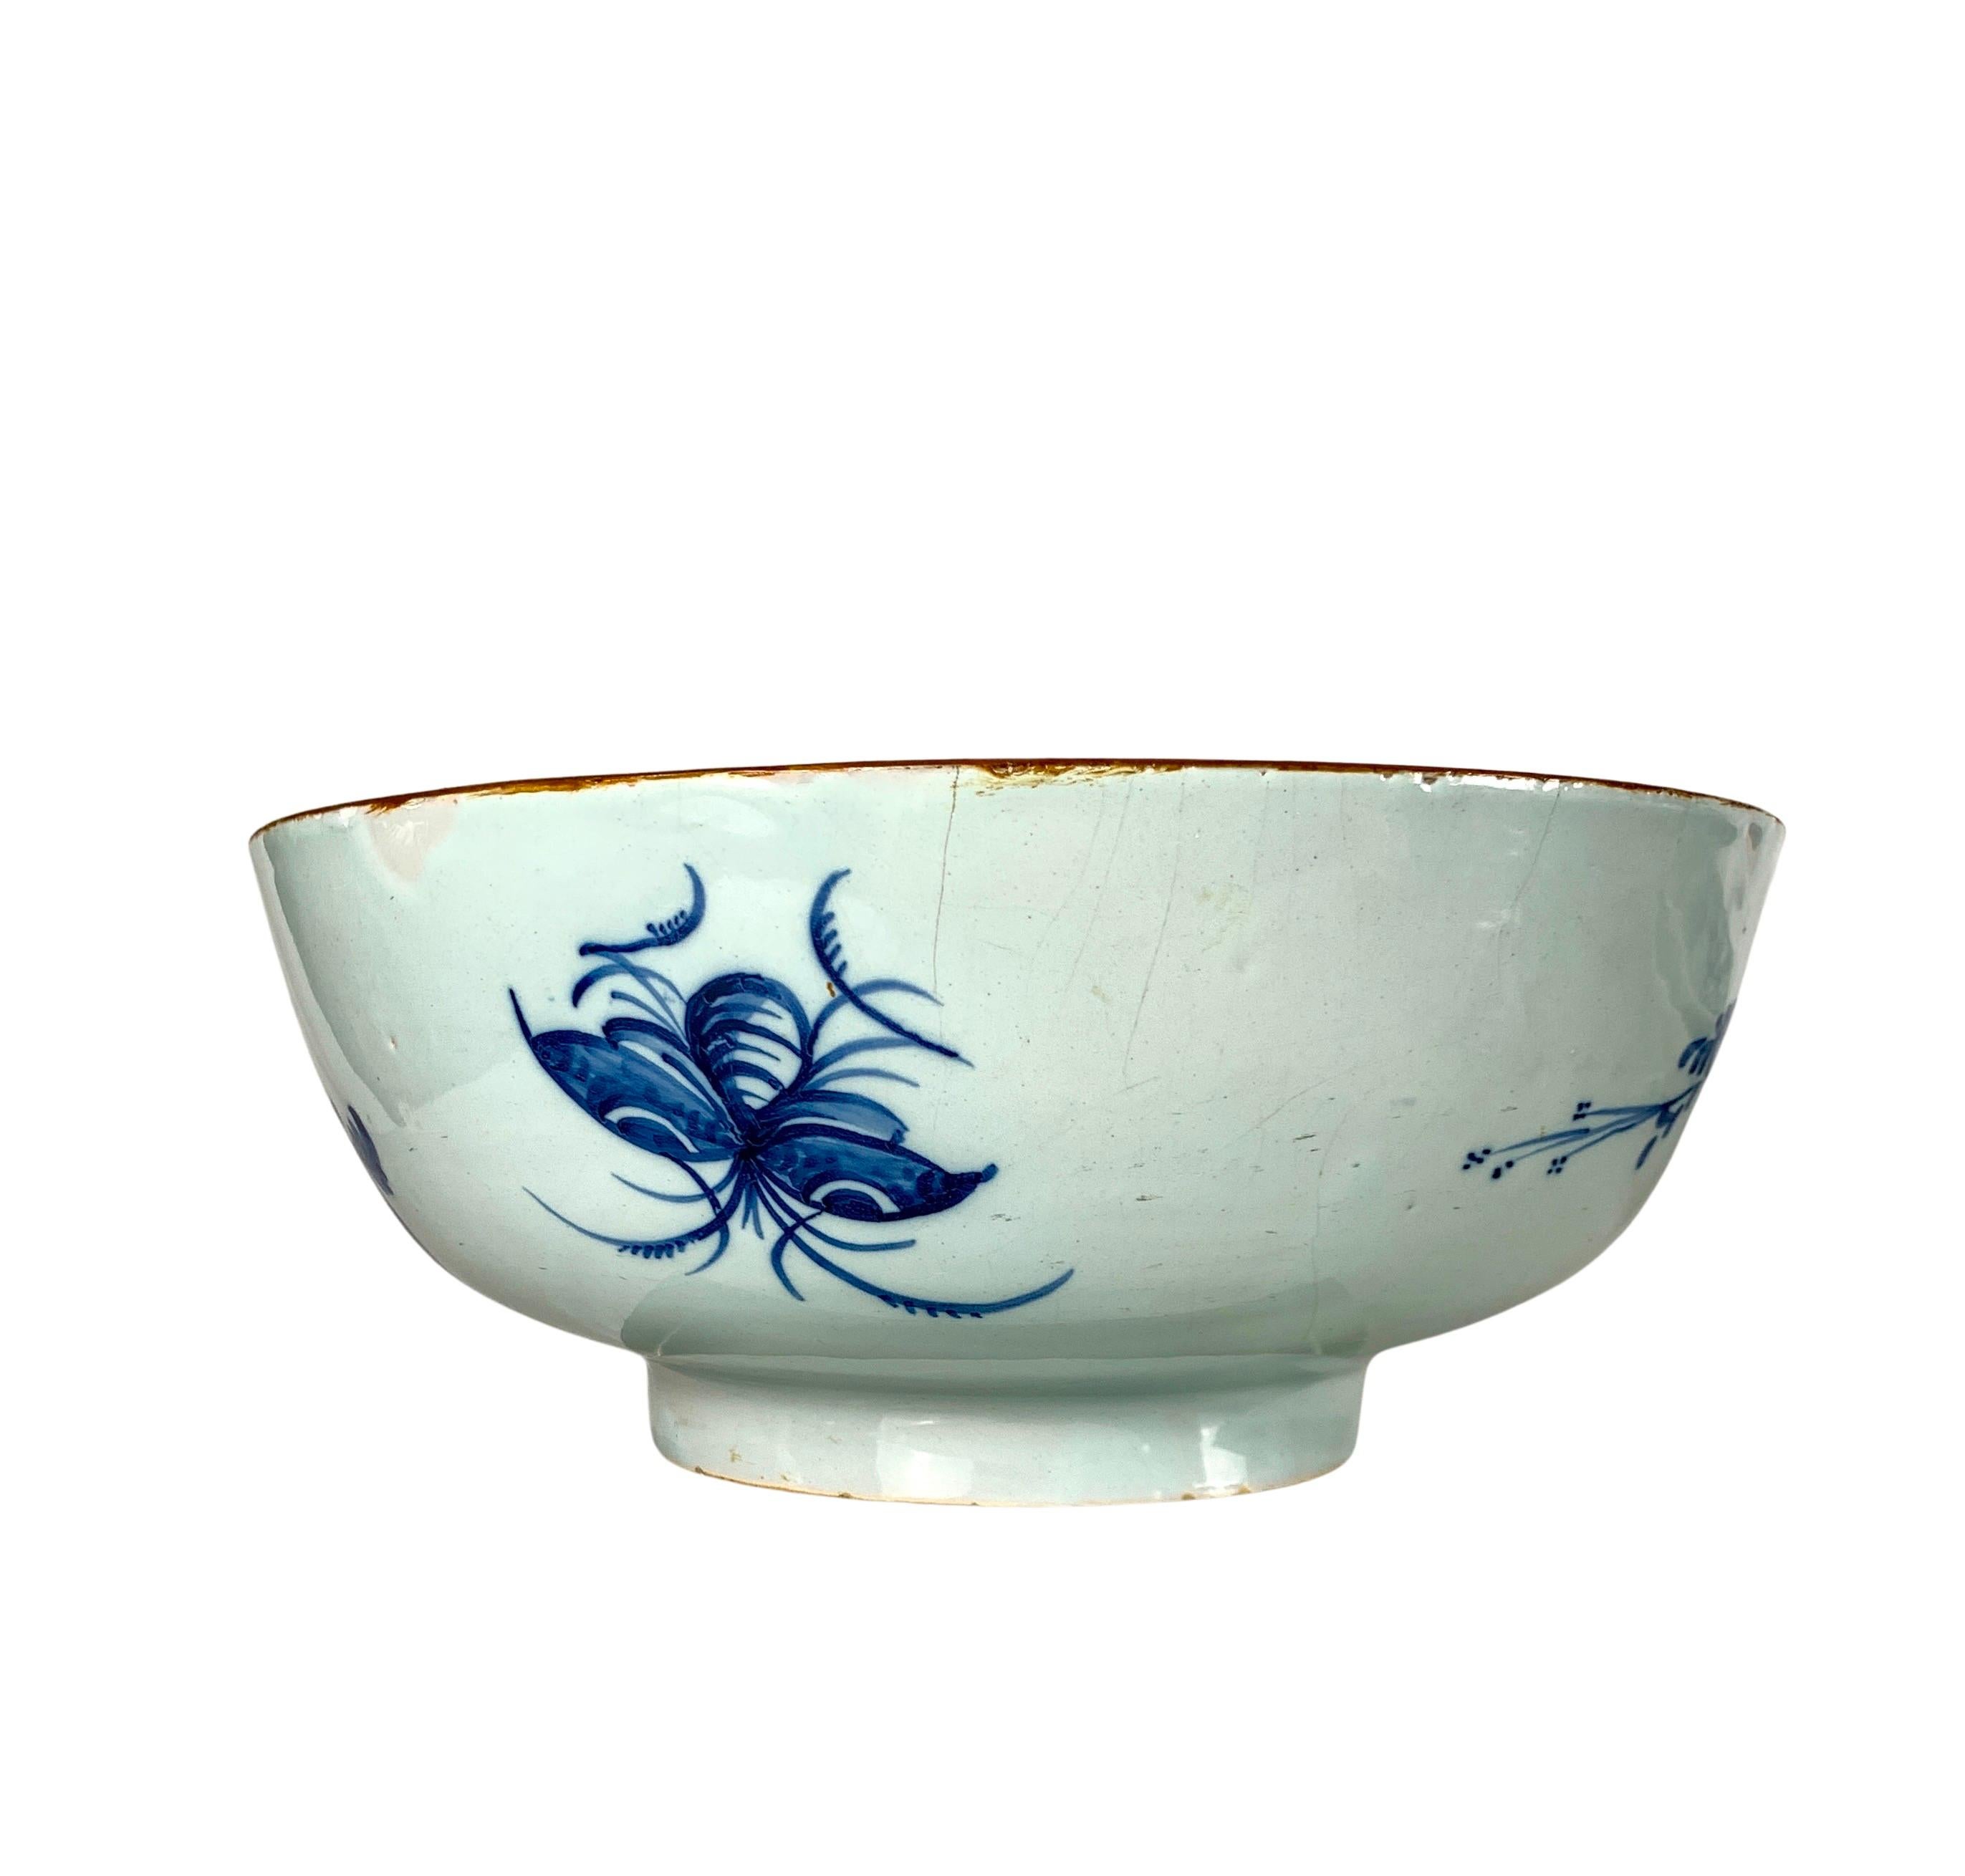 Dutch Blue and White Delft Punch Bowl Hand Painted Mid 18th Century Netherlands For Sale